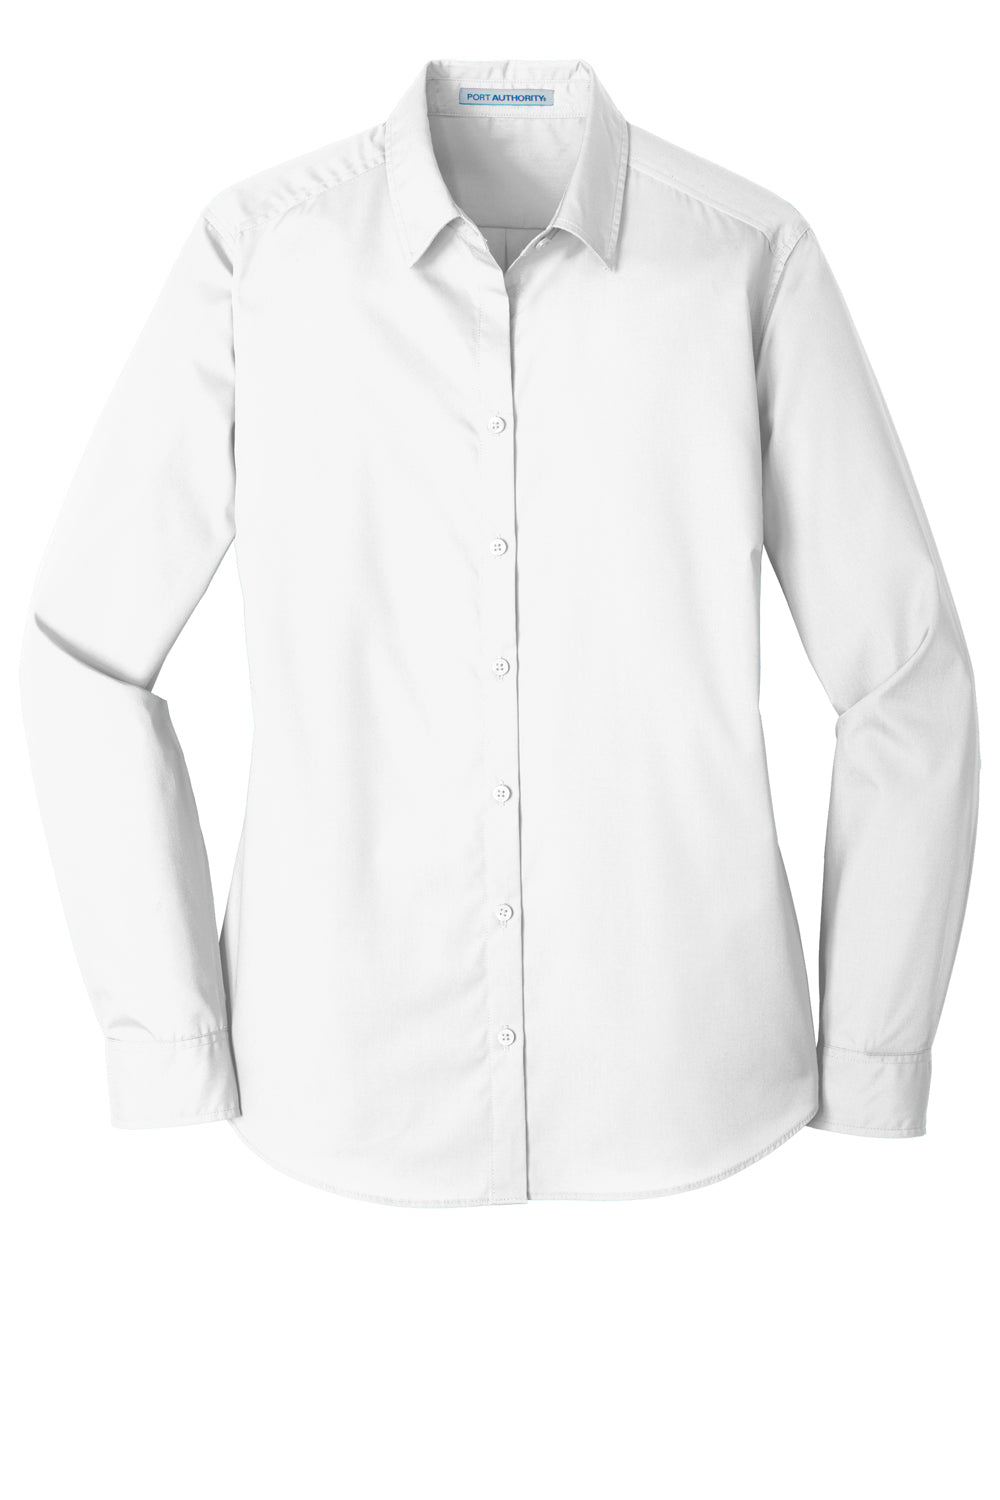 Port Authority LW100 Womens Carefree Stain Resistant Long Sleeve Button Down Shirt White Flat Front